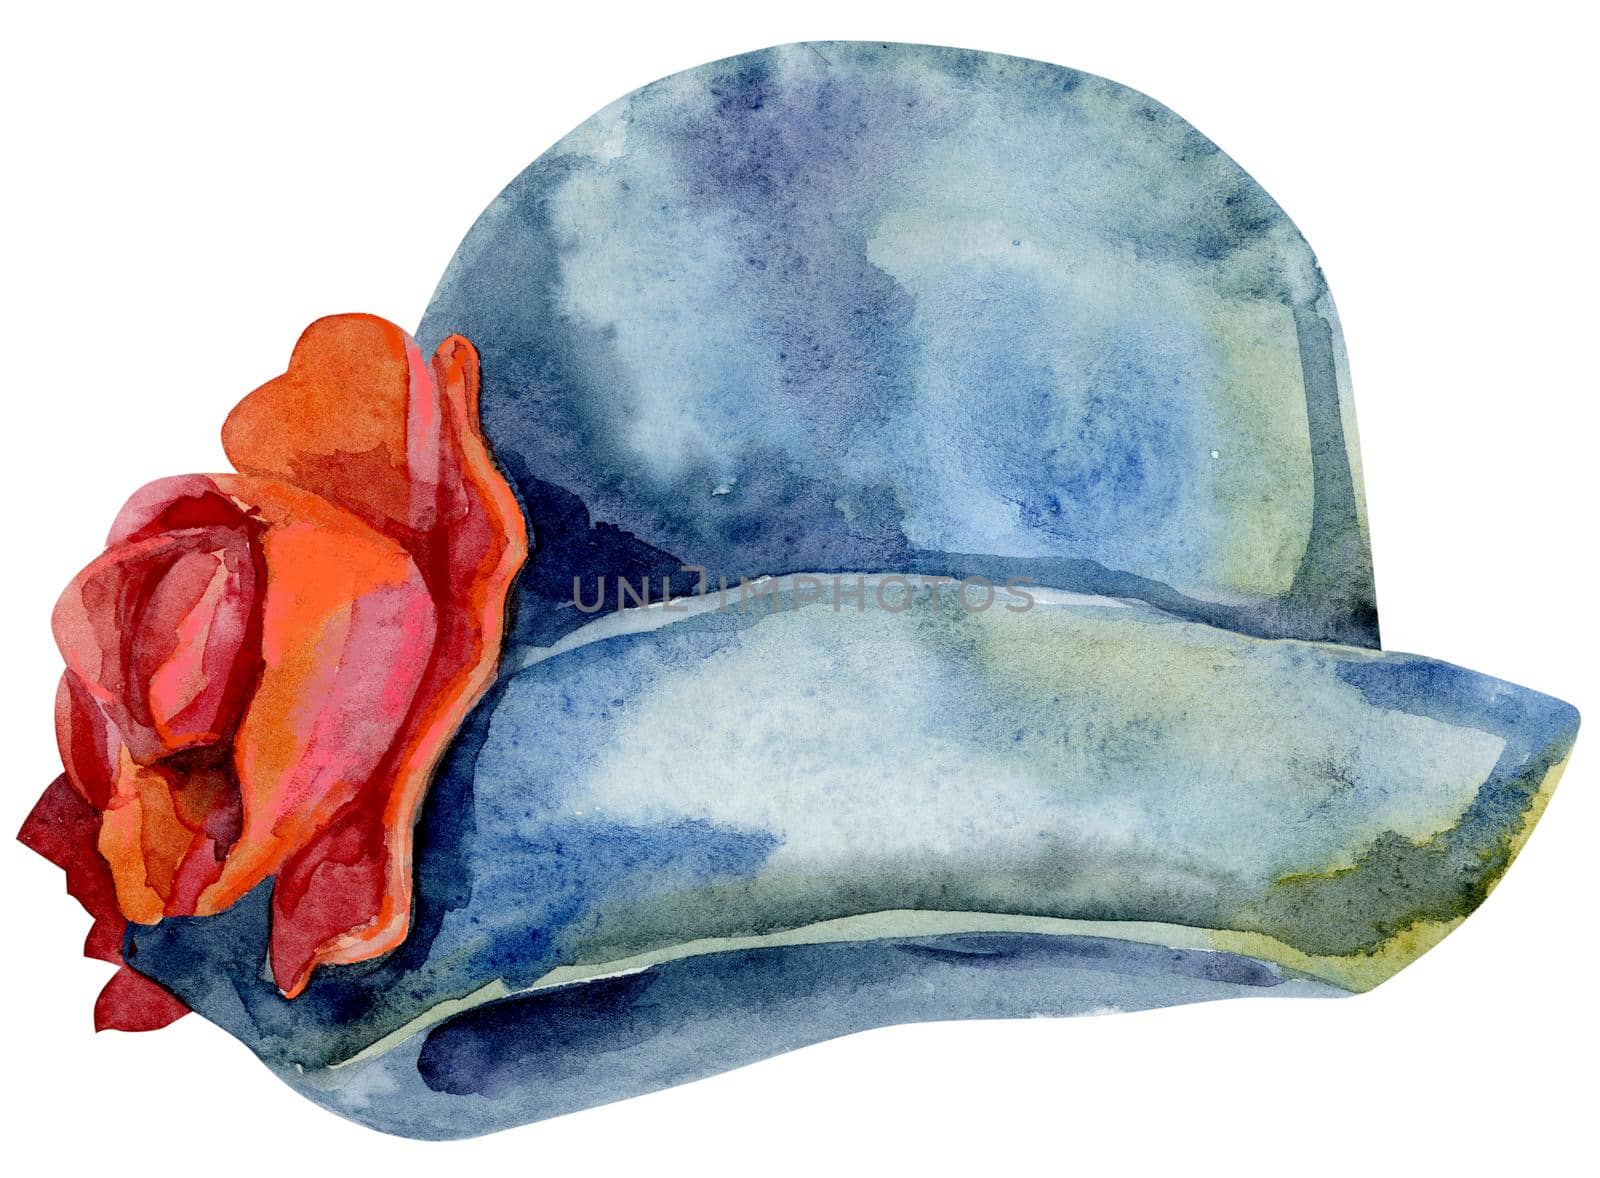 Watercolor women's gray hat with red flowers illustration. For clothing design